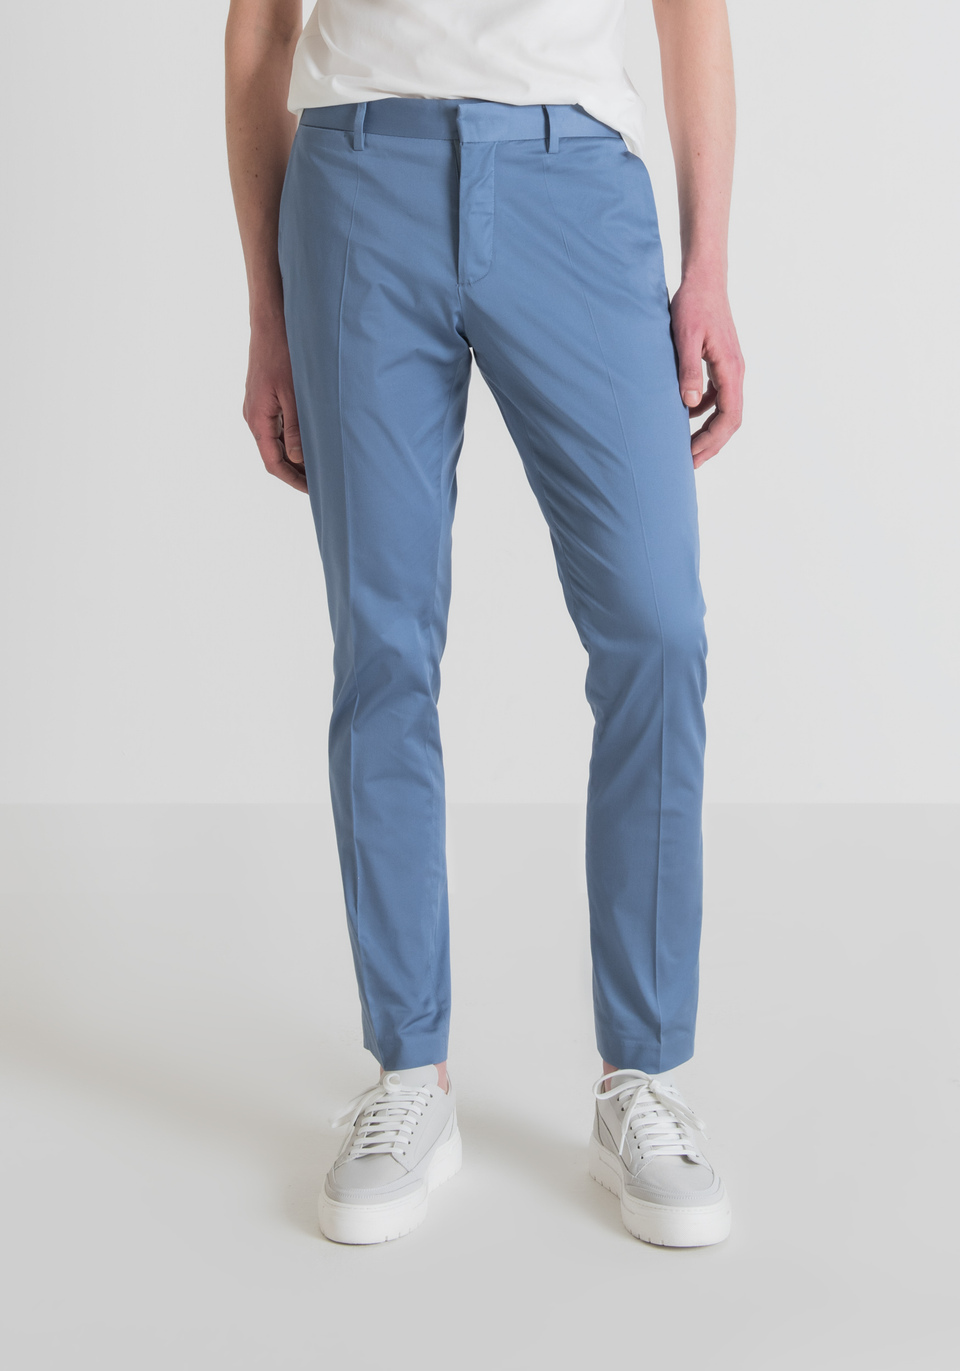 “BONNIE” SLIM-FIT TROUSERS IN LIGHTWEIGHT SATEEN-FINISH COTTON - Antony Morato Online Shop